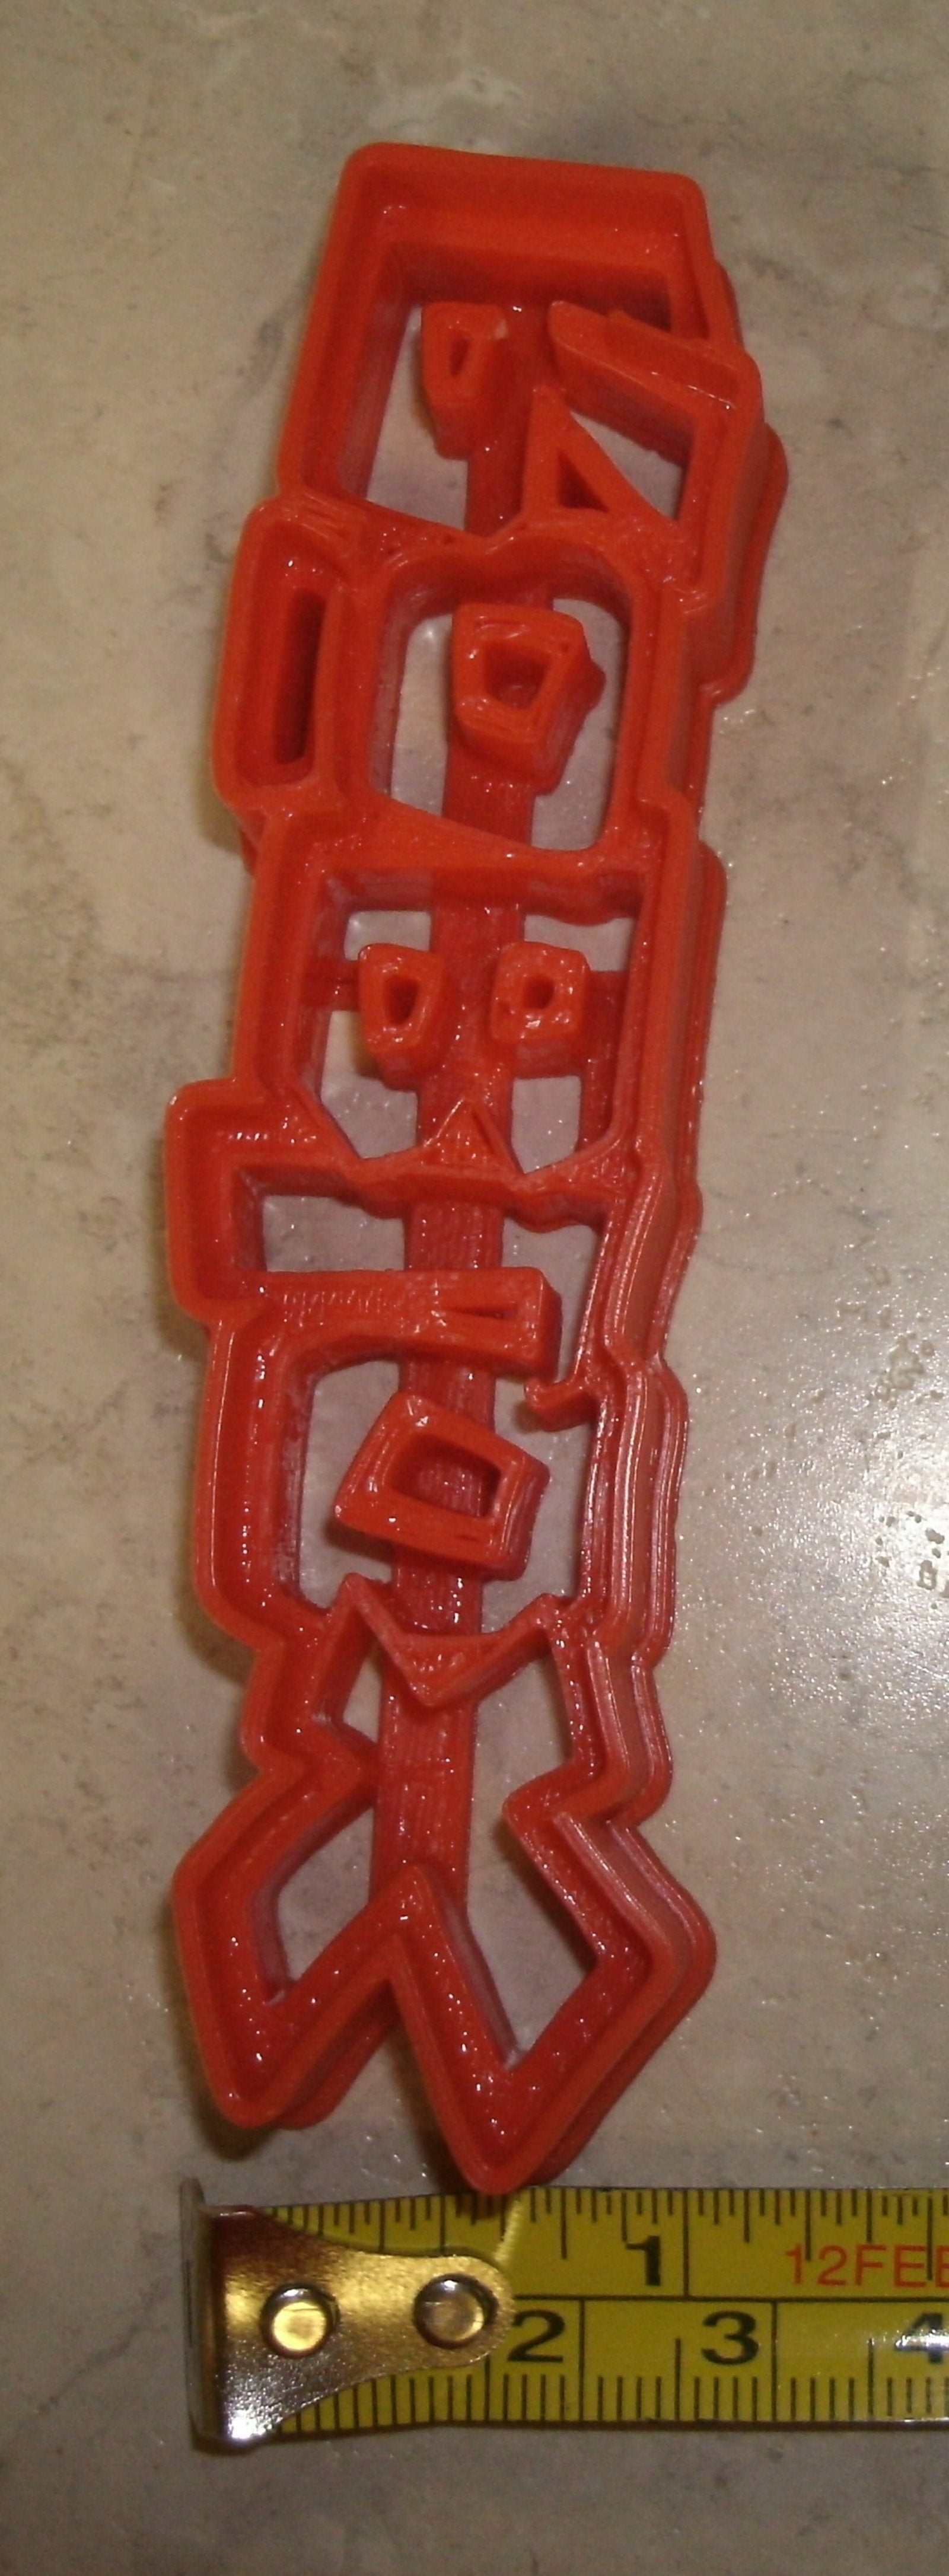 Roblox Video Game Logo Cookie Cutter Baking Tool Made In Usa Pr726 Y N G Llc - roblox 0002